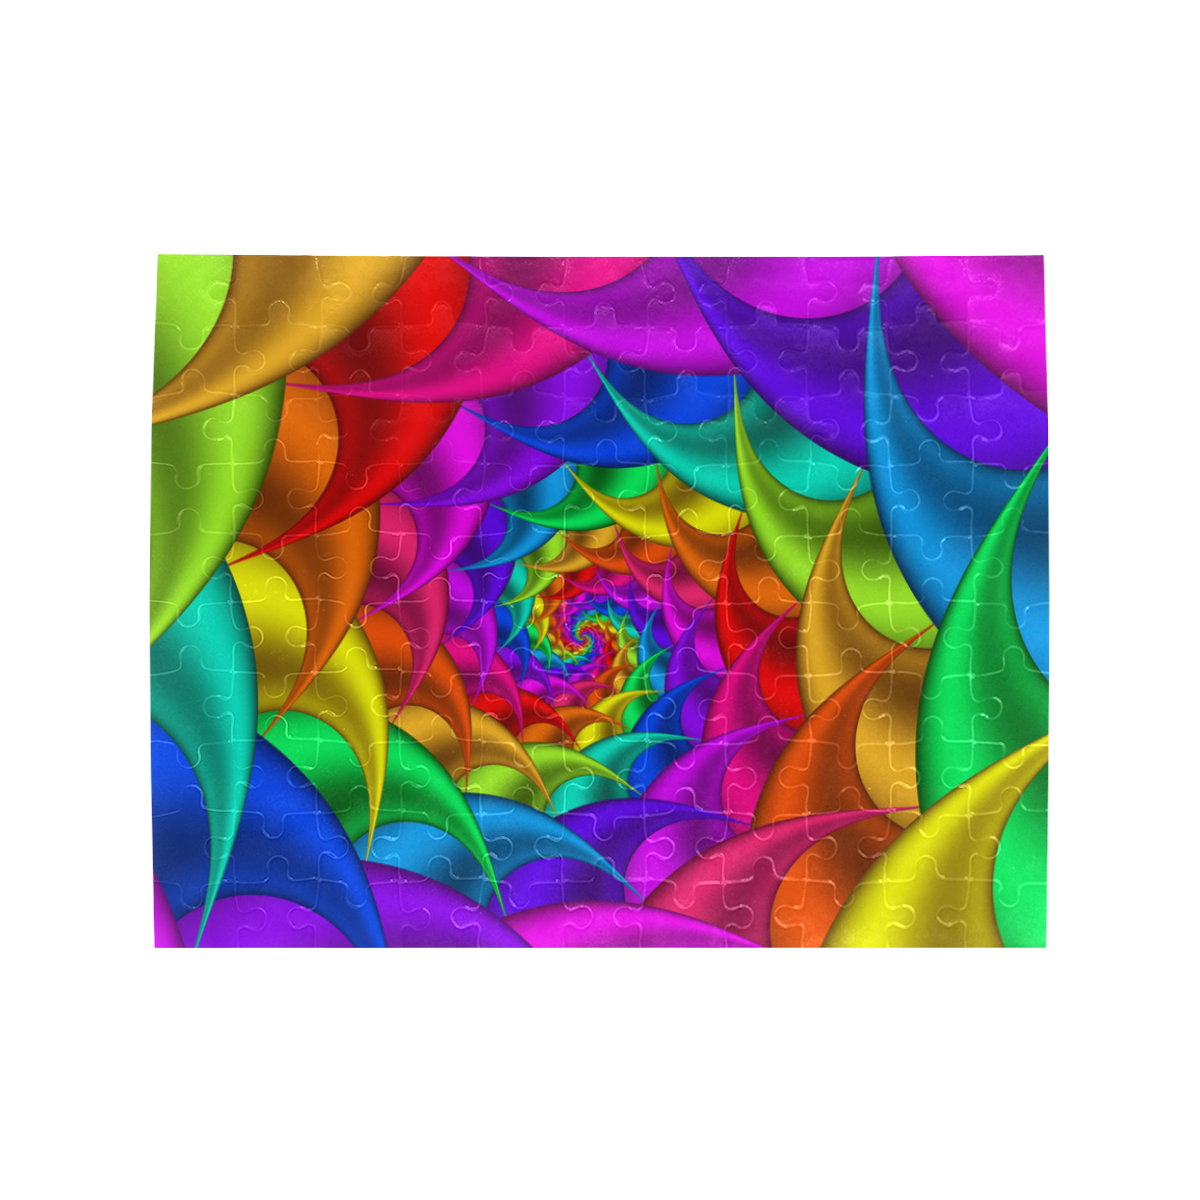 Psychedelic Rainbow Spiral Puzzle Rectangle Jigsaw Puzzle (Set of 110 Pieces)